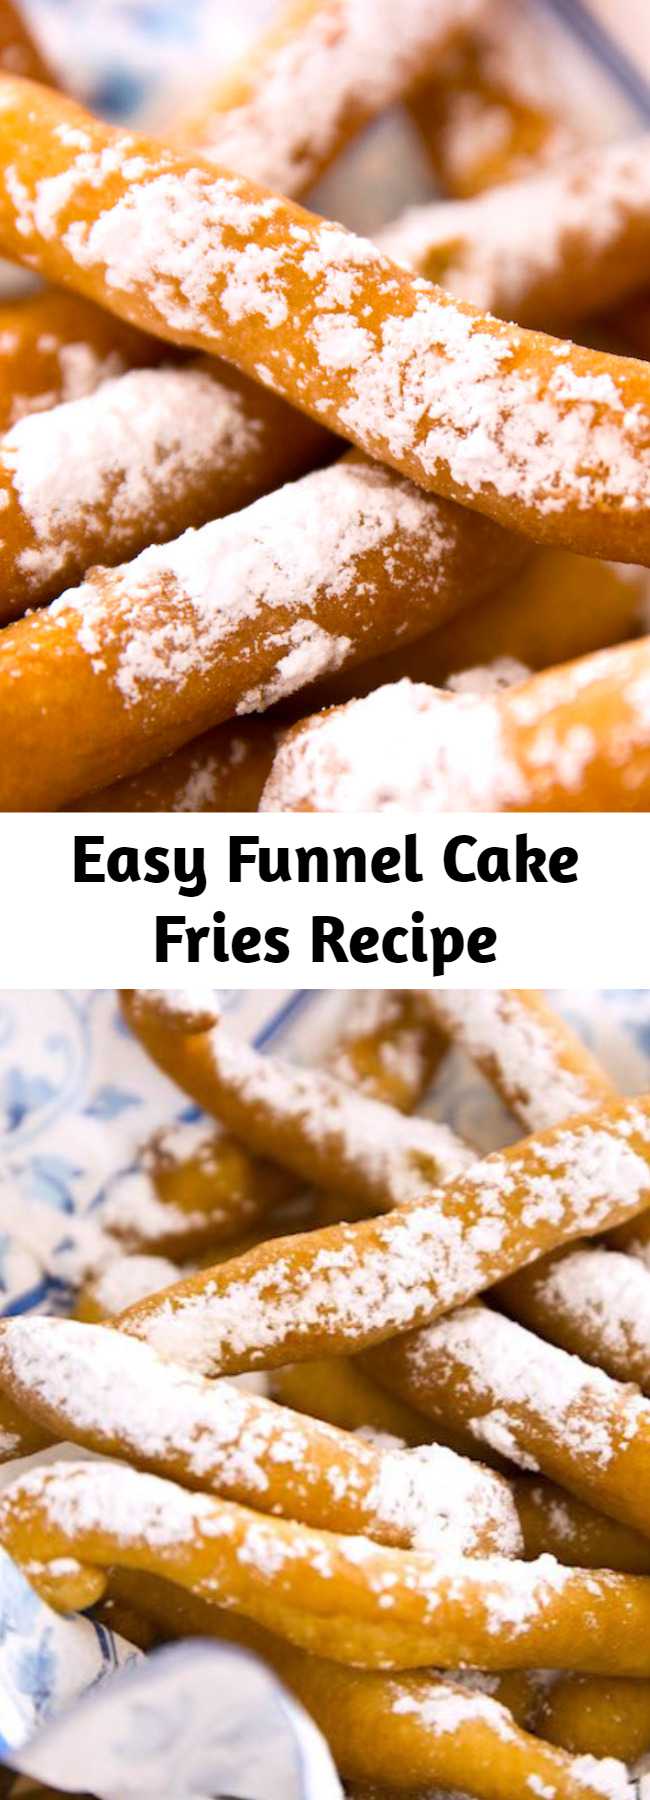 Easy Funnel Cake Fries Recipe - Funnel Cake Fries are a mouthwatering snack that's crispy on the outside and fluffy on the inside. Make them at home in just 20 minutes and serve with caramel sauce or marshmallow fluff. Perfect for parties!